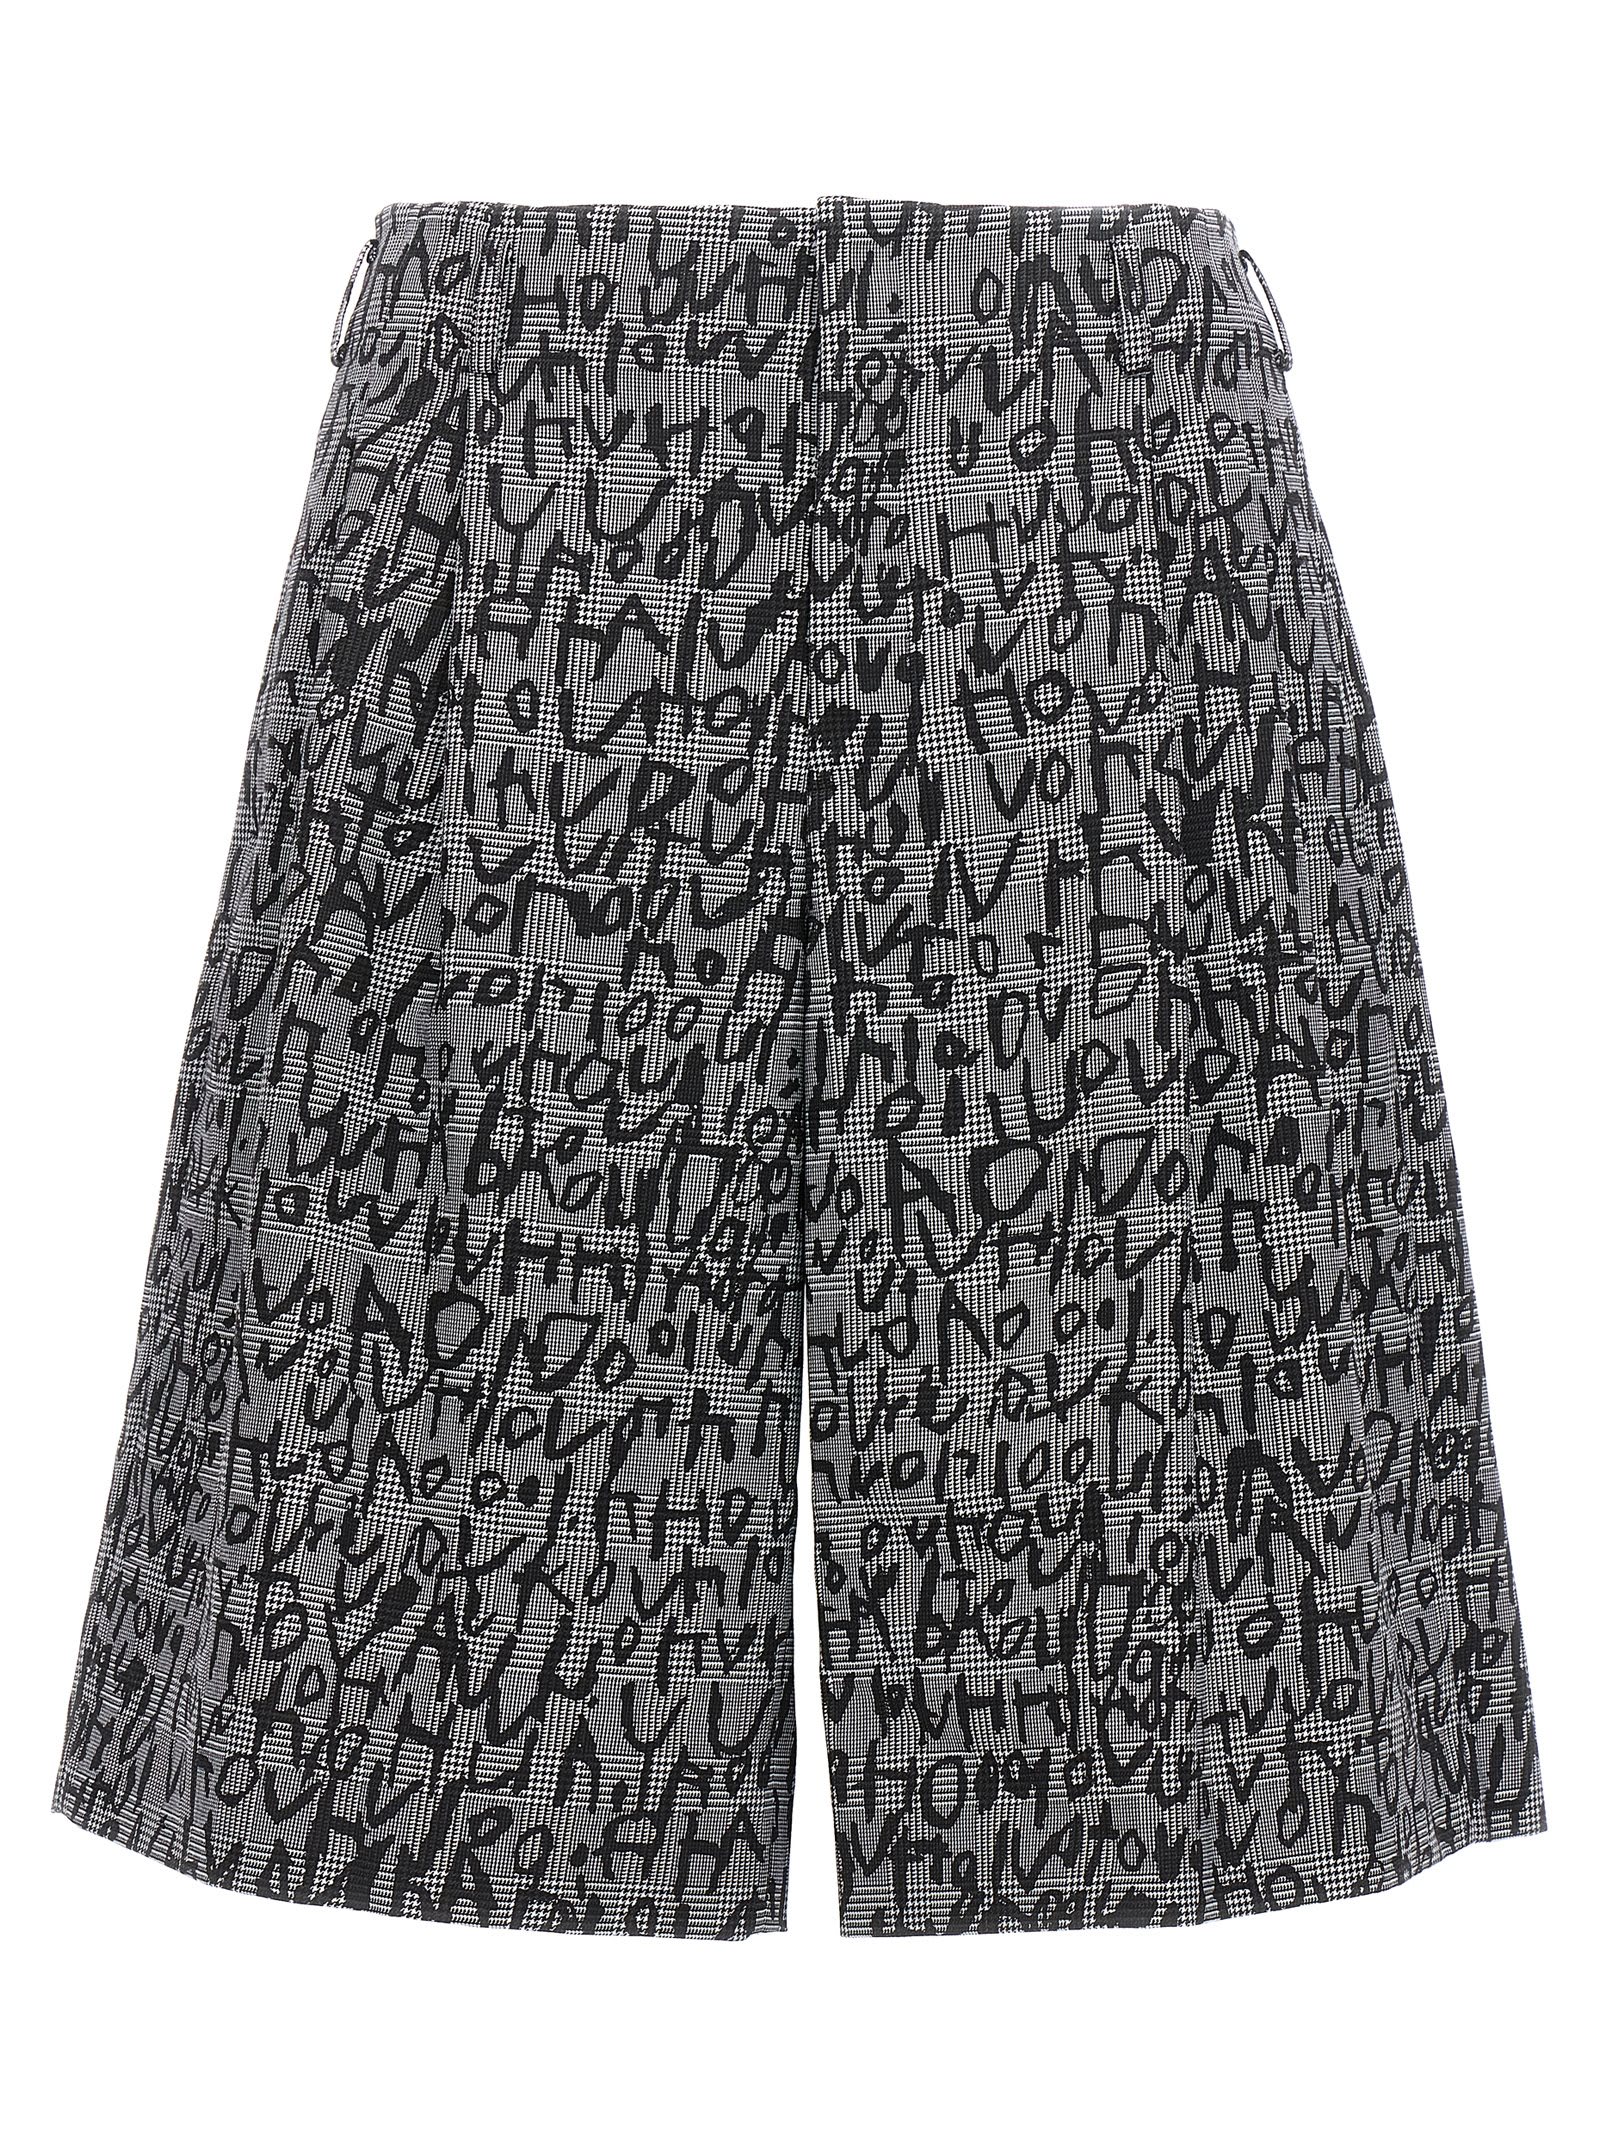 All Over Print Brmuda Shorts